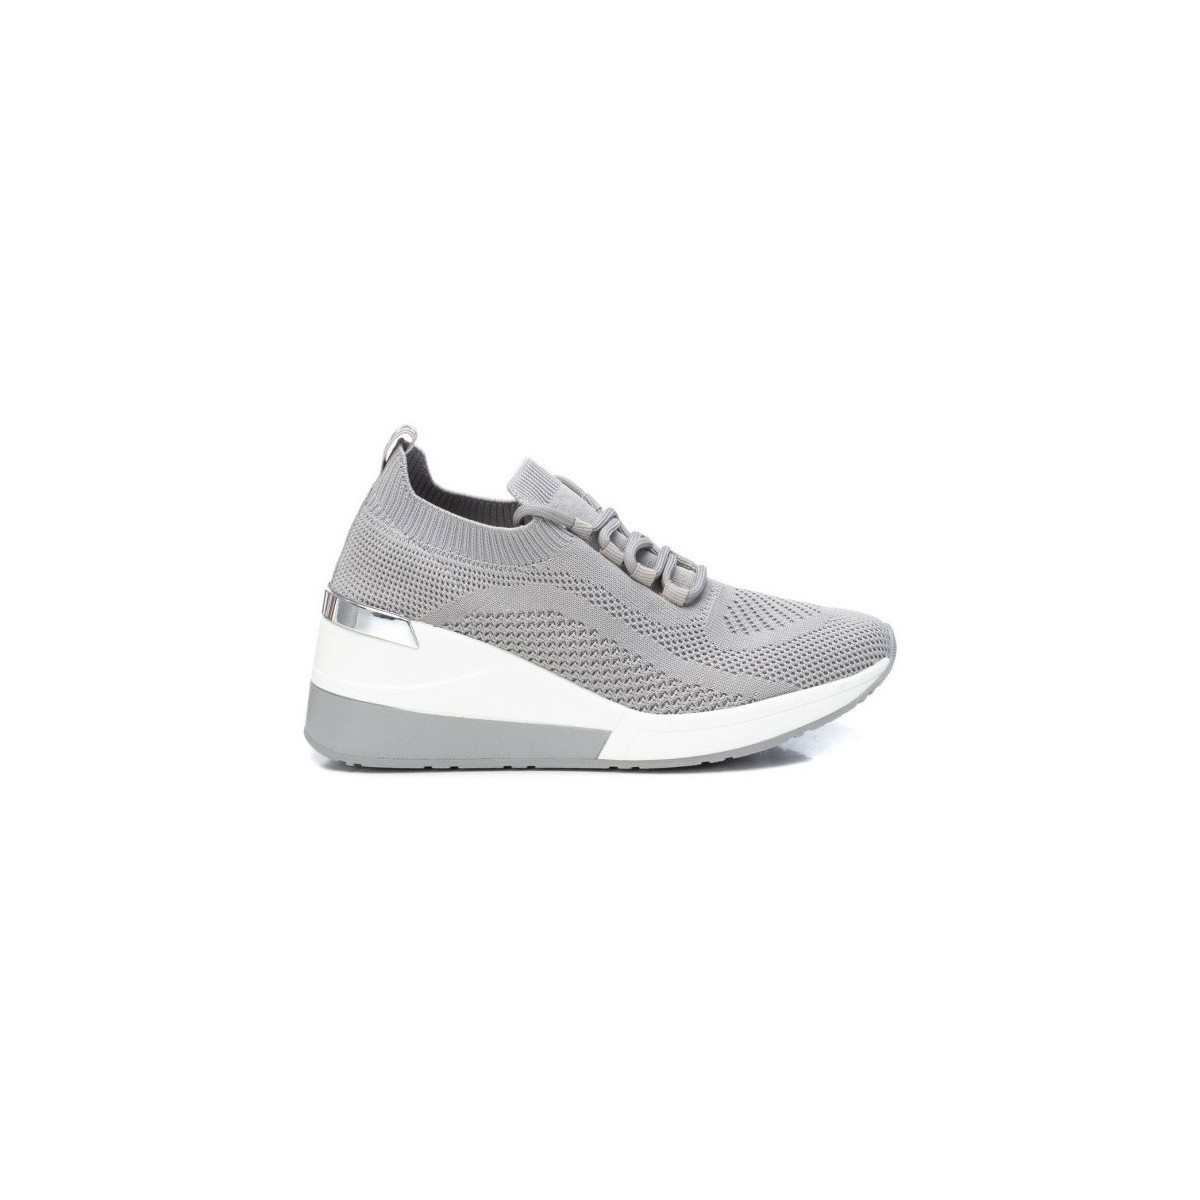 Chaussures Femme Baskets mode Xti ZAPATO DE MUJER  036847 Gris